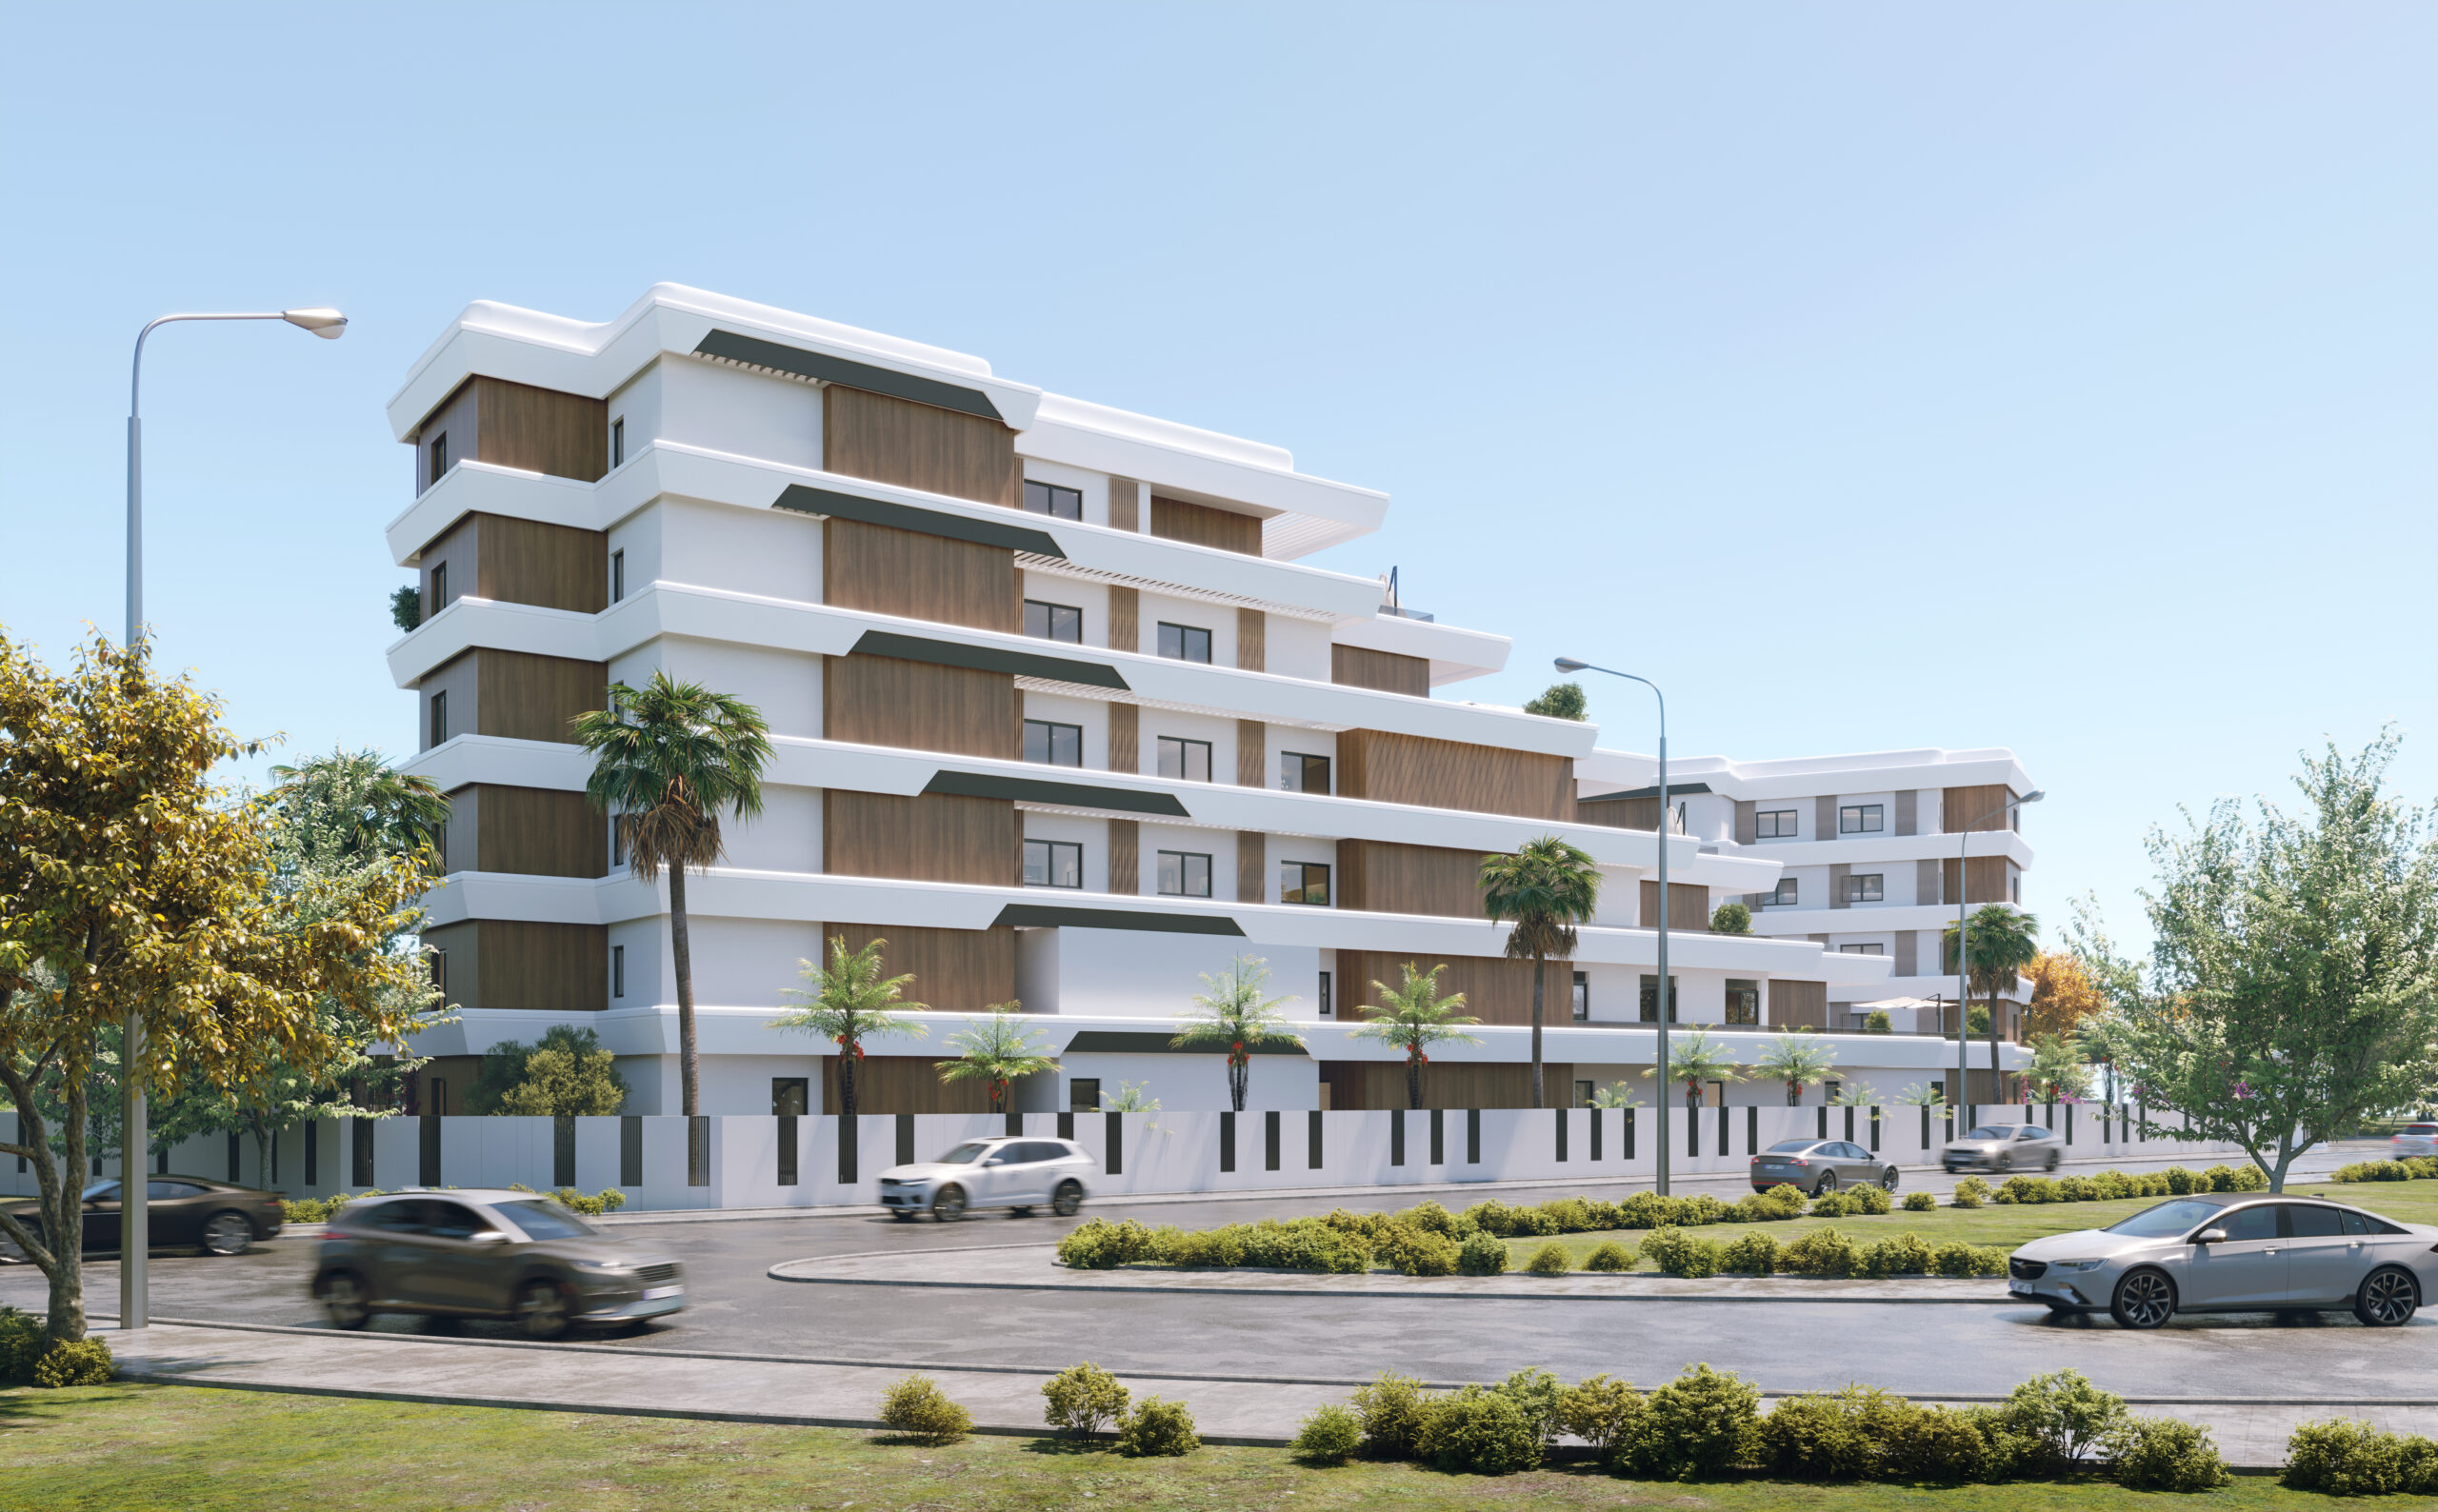 A new project in Antalya Altintas